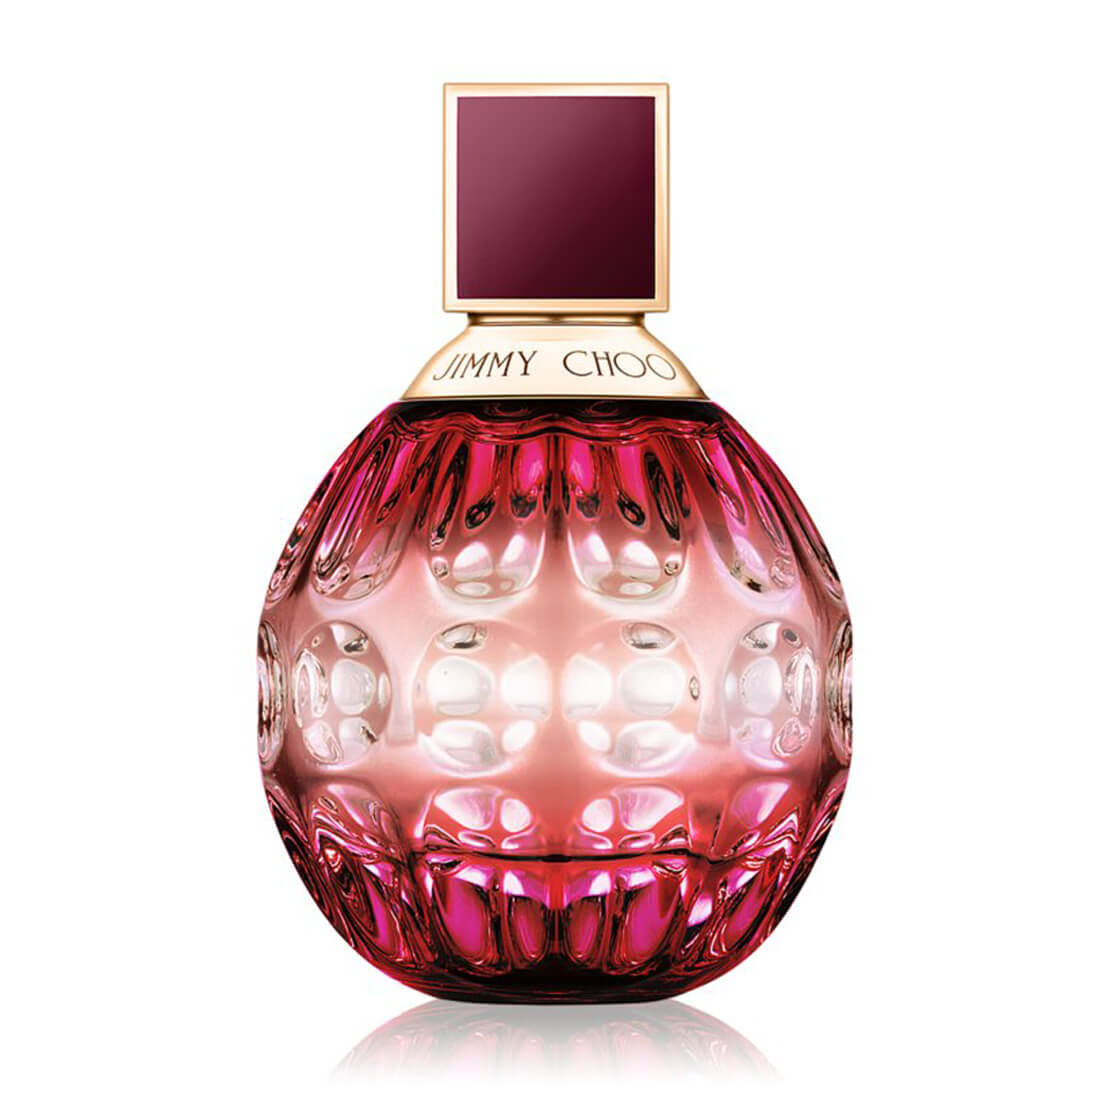 Jimmy Choo's 'I want Choo' signature perfume is a celebration of femininity  and glamour, with a radiant mix of white floral, sensua... | Instagram